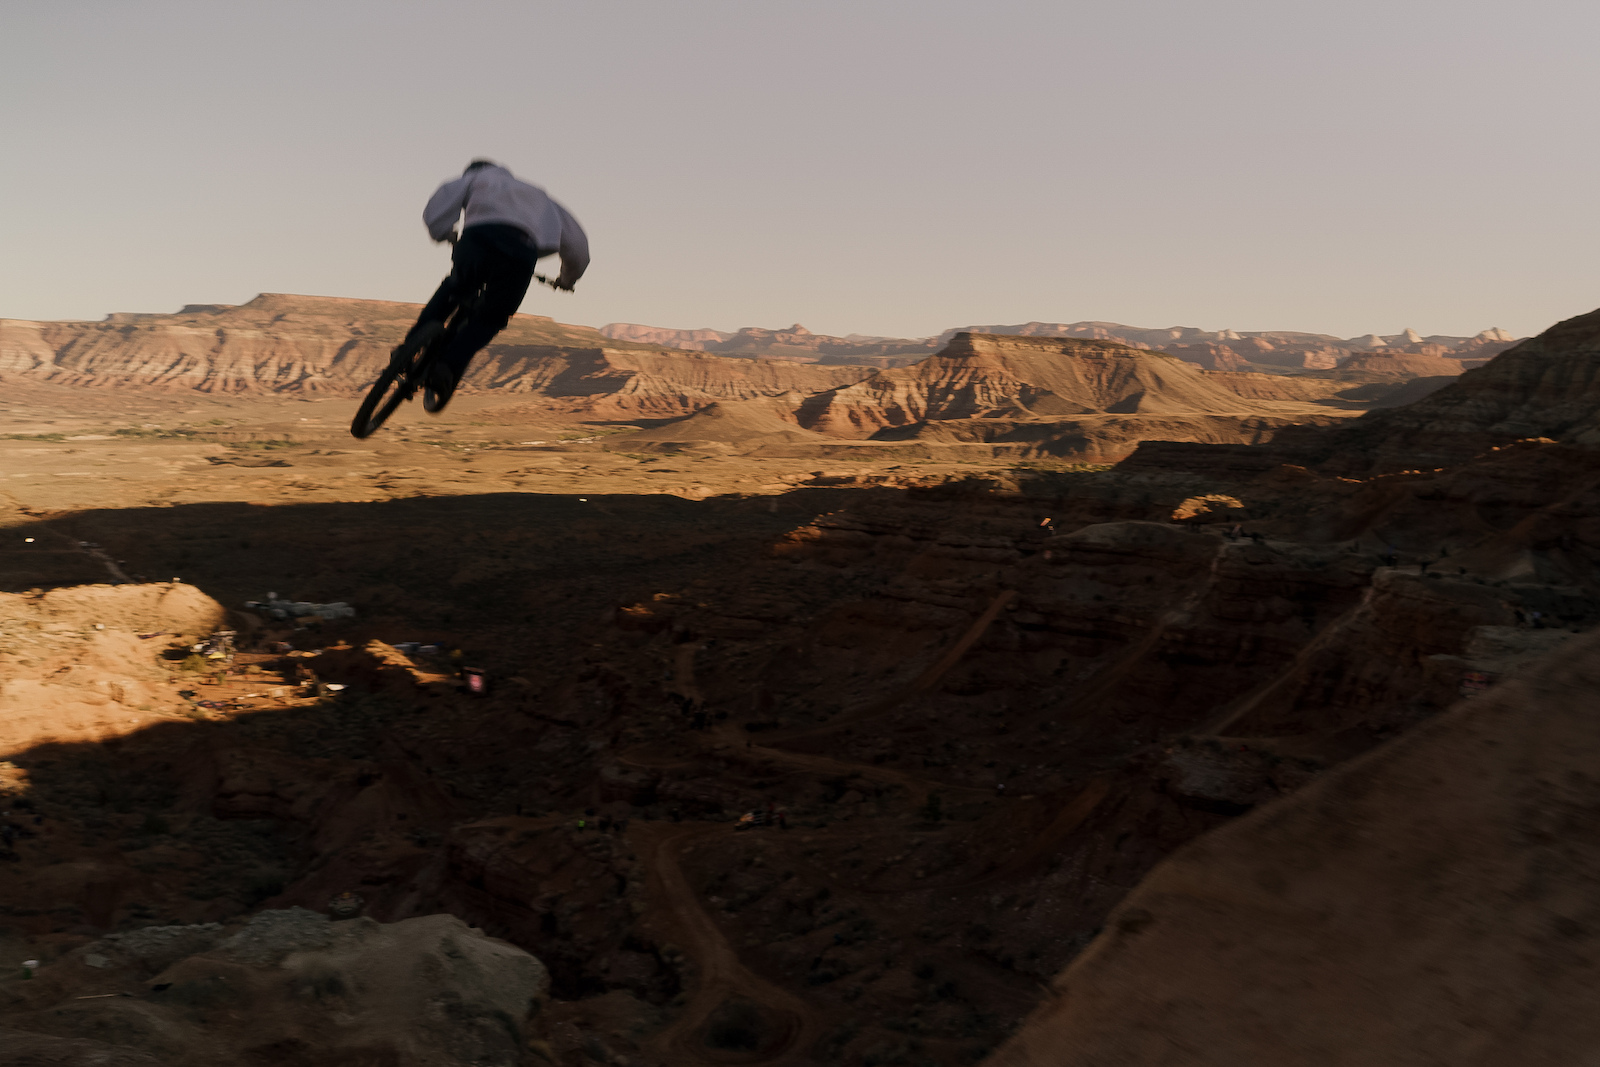 Reed Boggs in Virgin Utah during the filming of Riding Off Cliffs Craig Grant